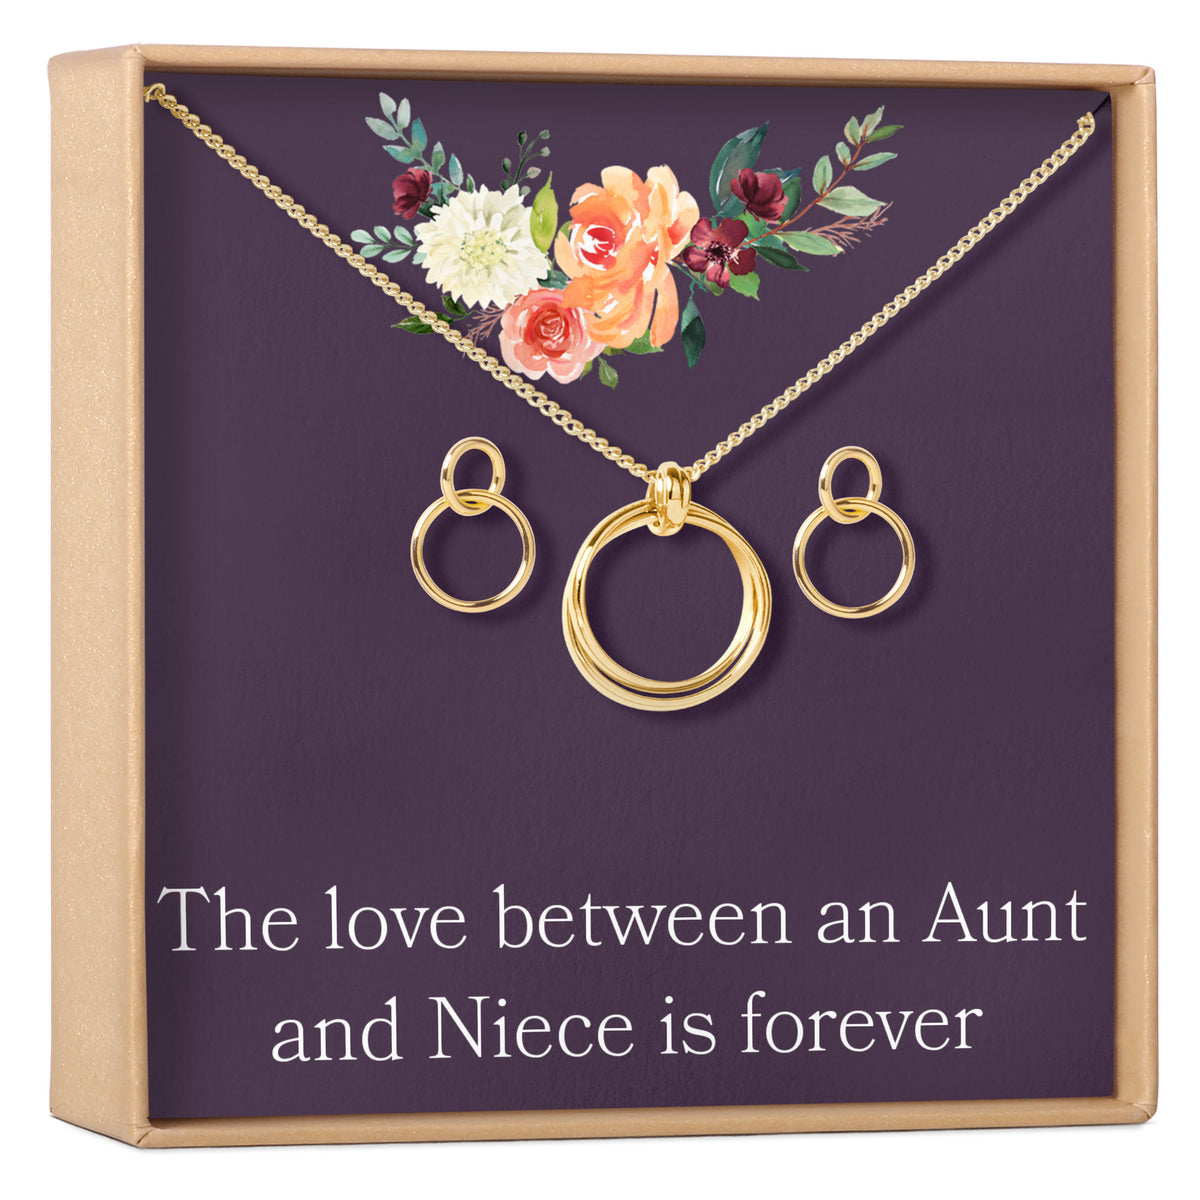 Aunt-Niece Linked Circles Earring and Necklace Jewelry Set